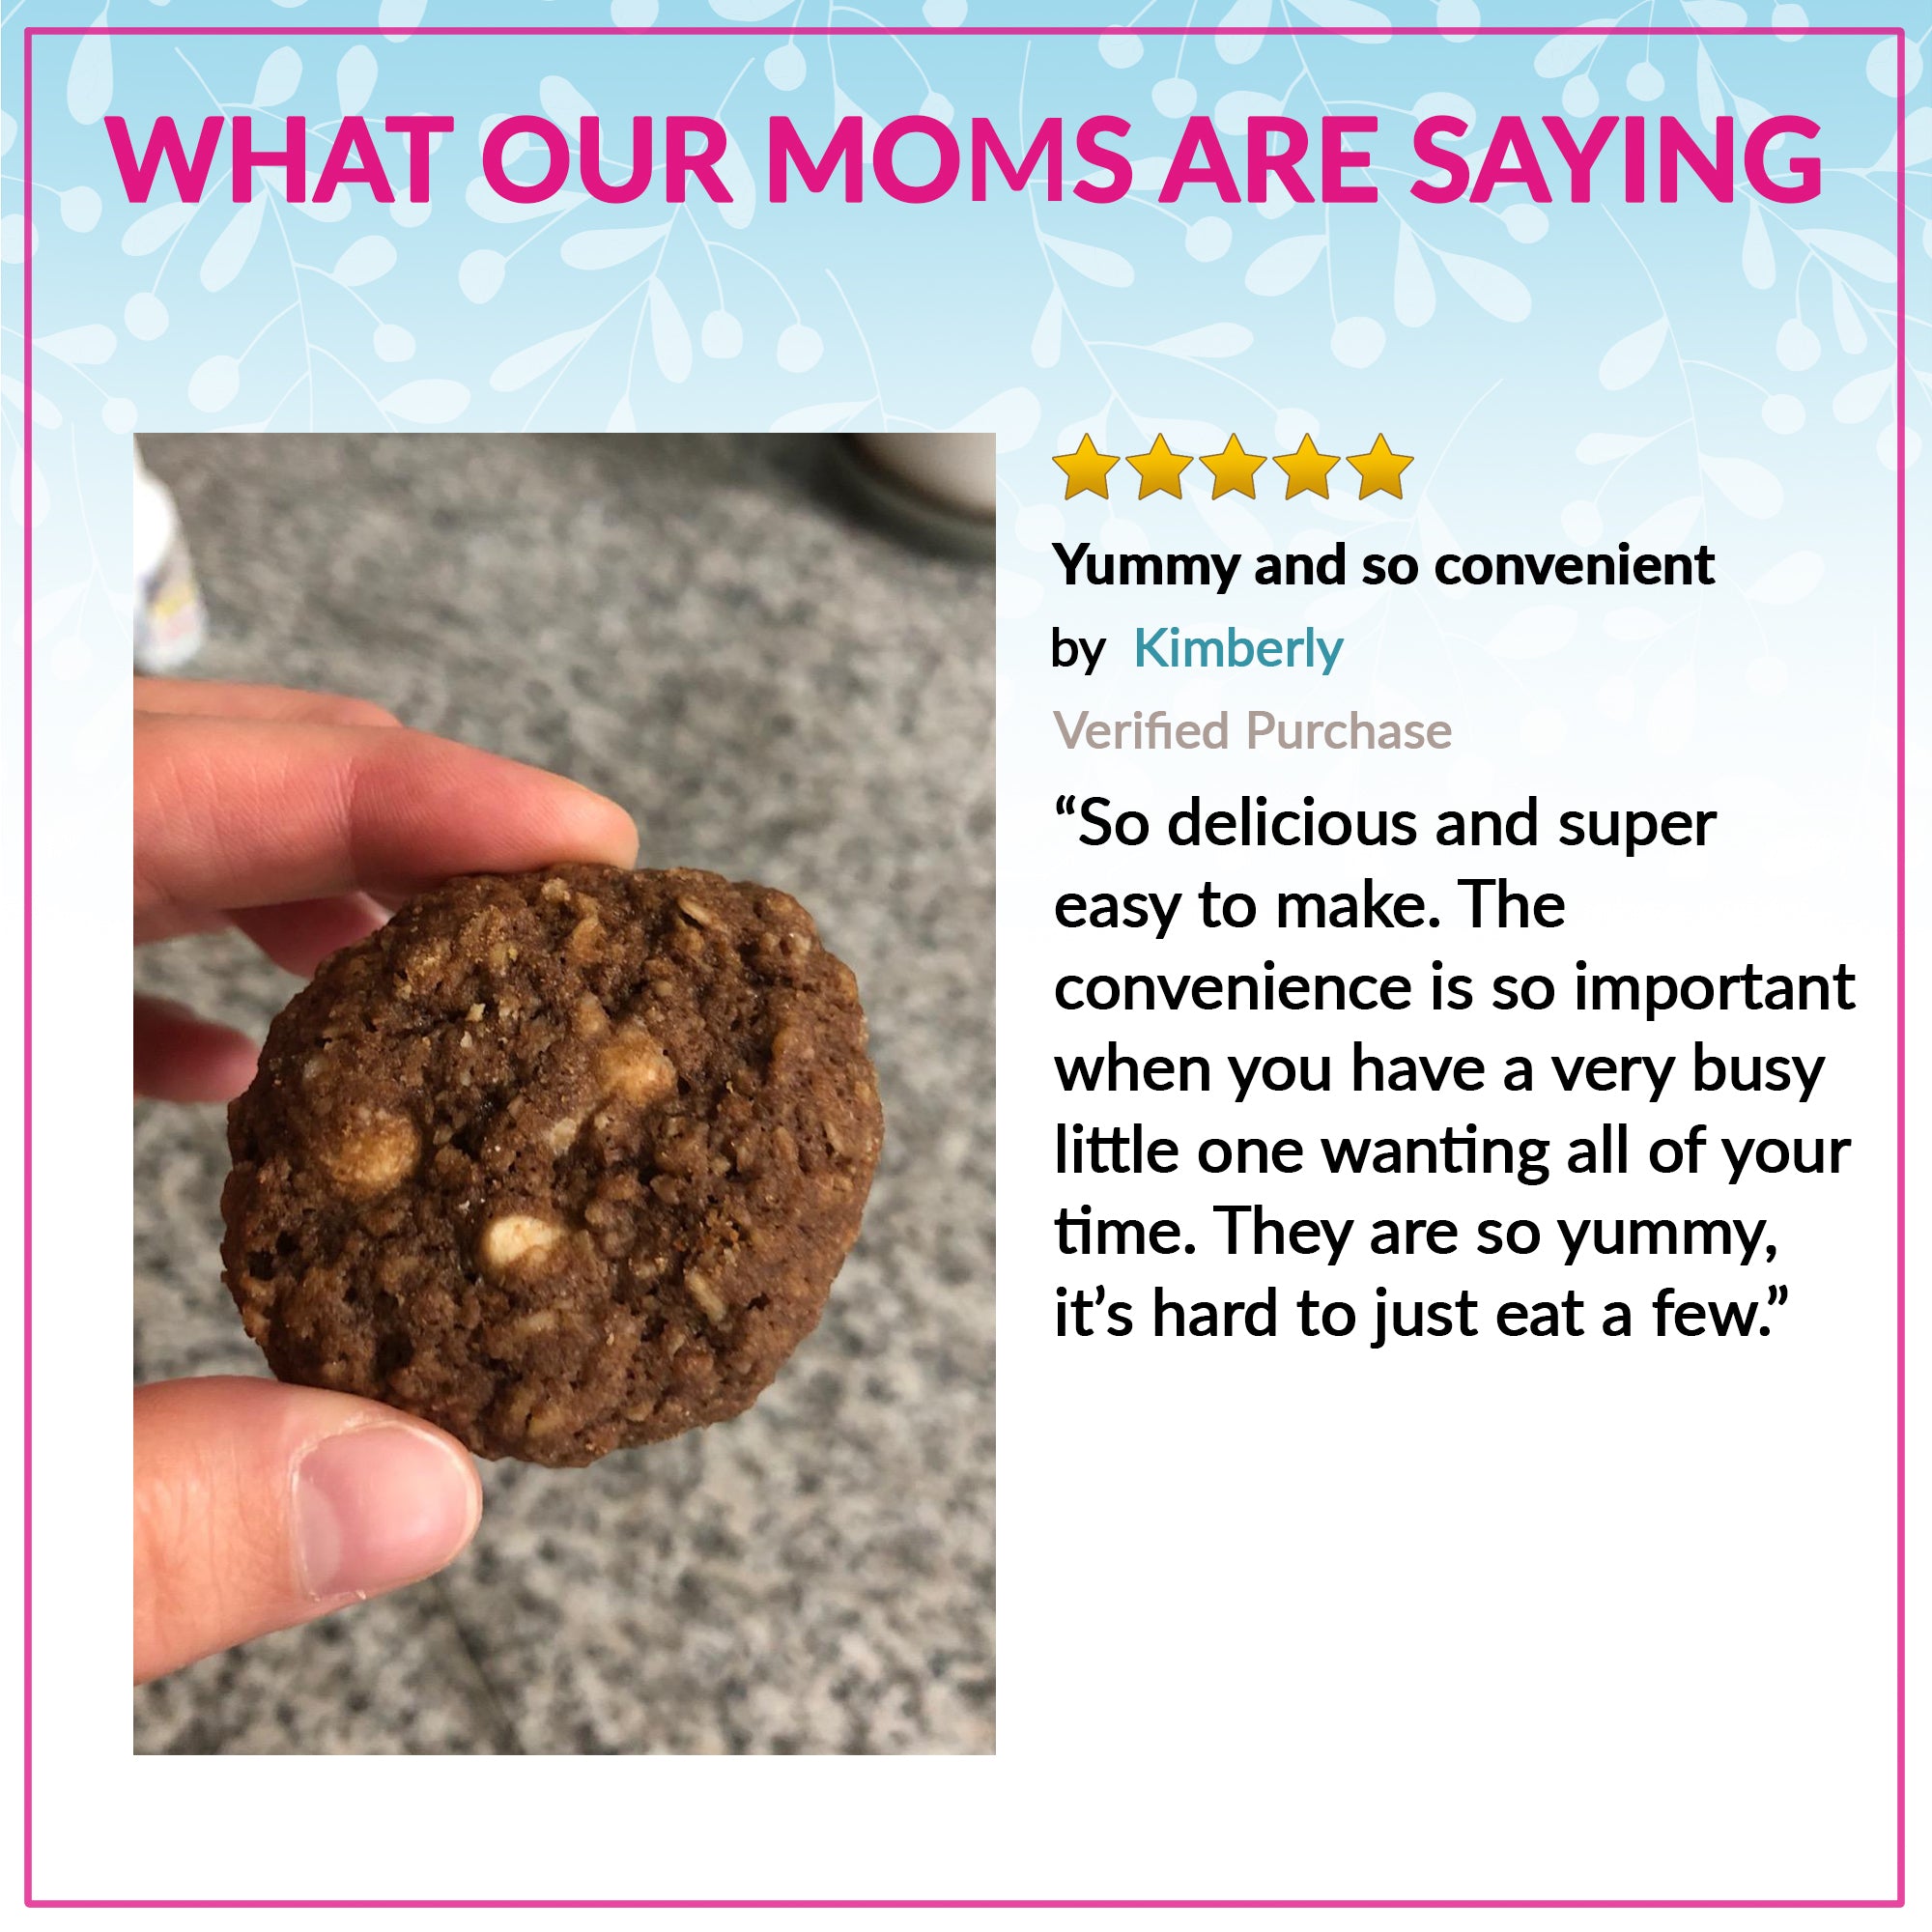 Lactation Cookies By Mommy Knows Best – LaVie Mom